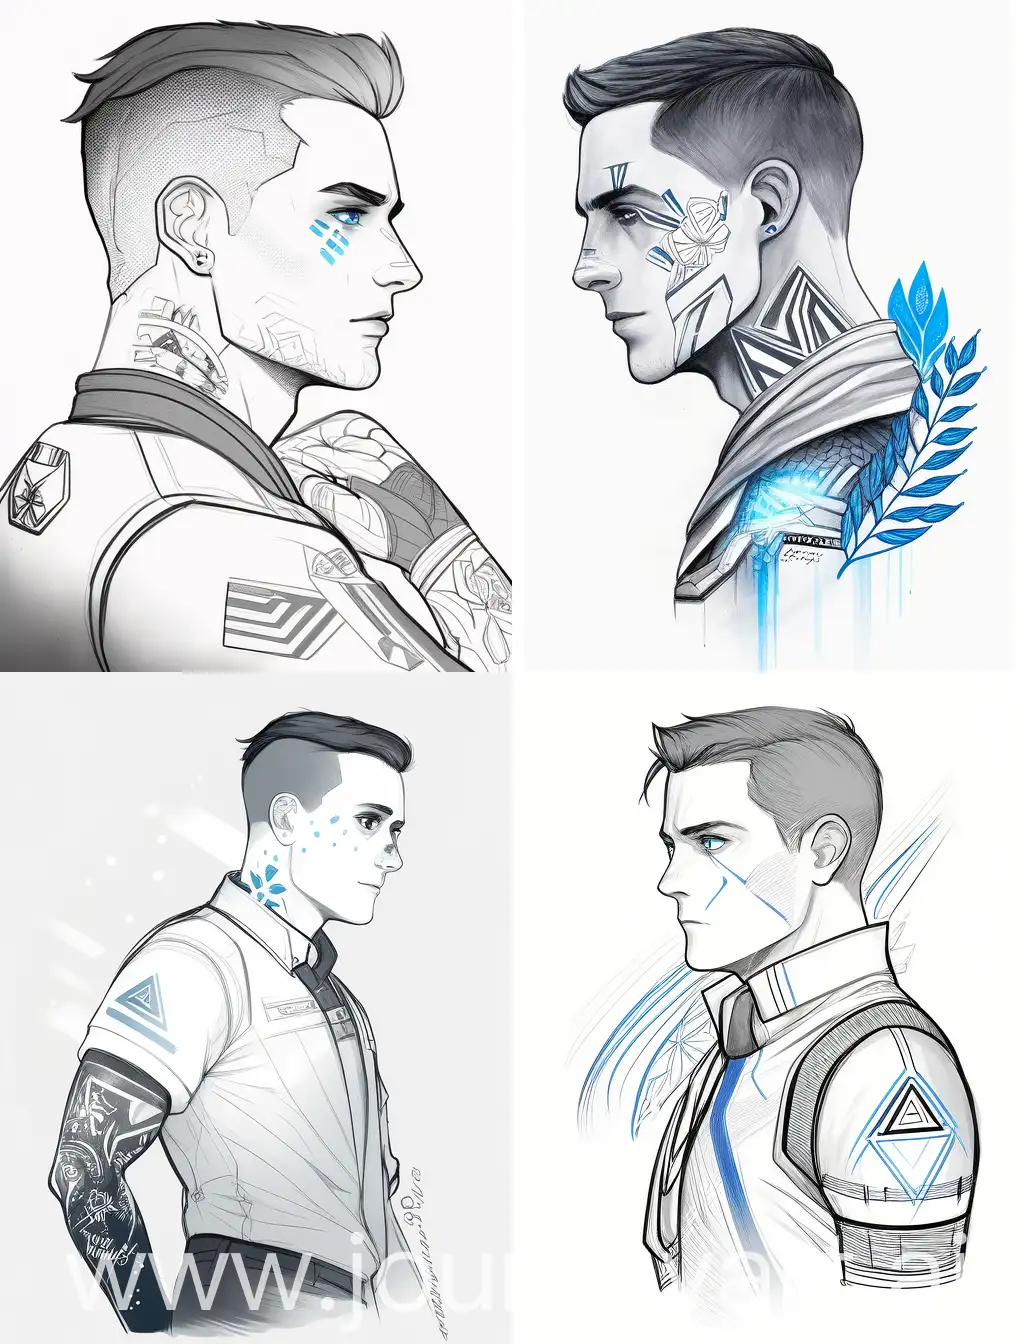 connor from detroit become human, tattoo design sketch, white background